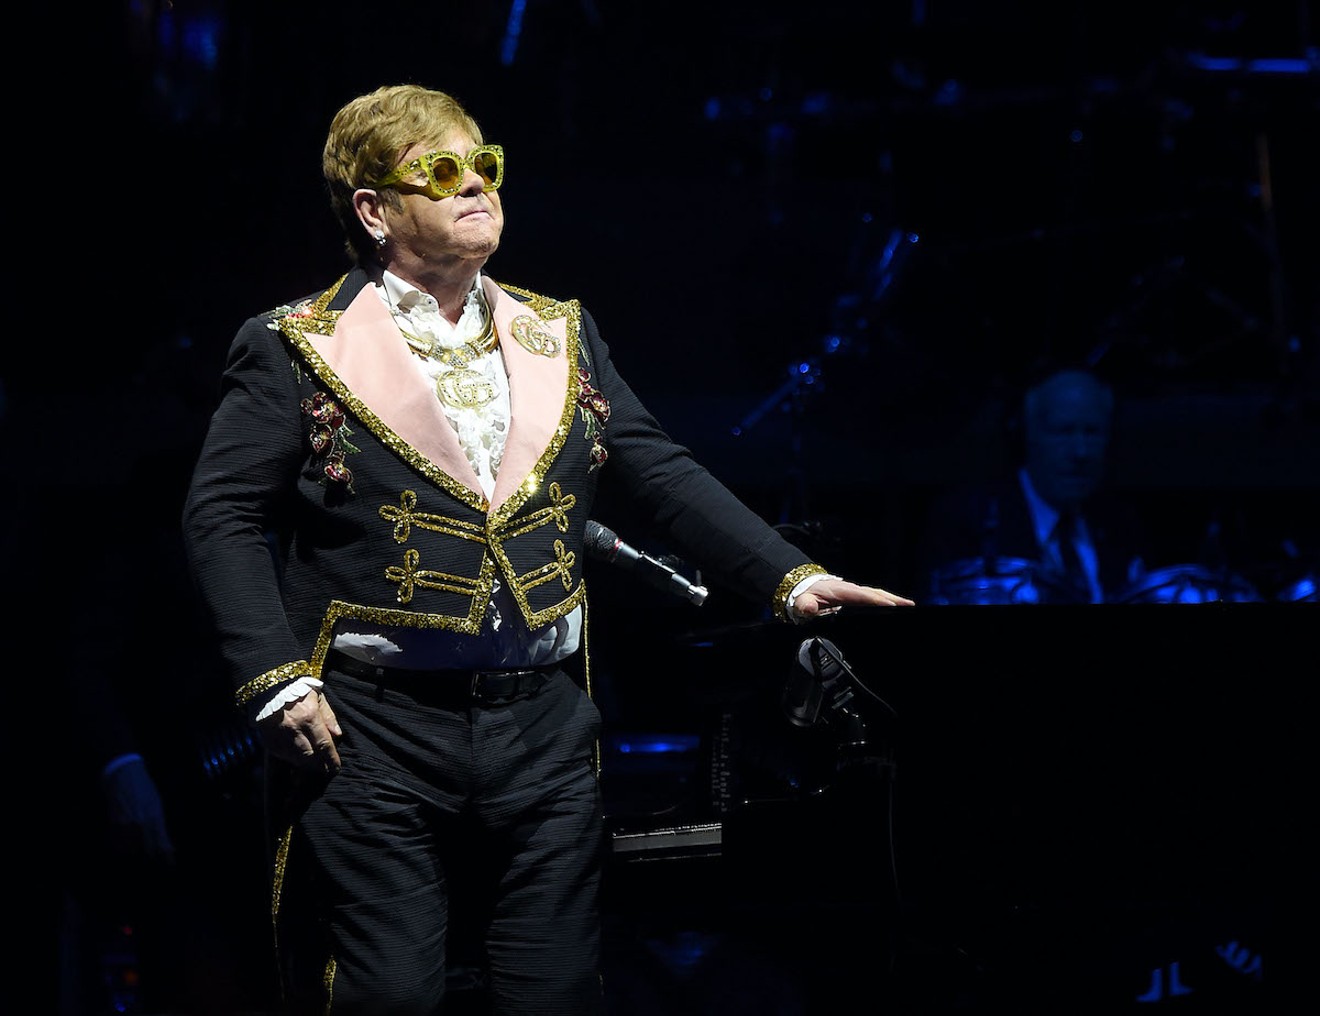 Sir Elton John performs onstage at New York's Madison Square Garden March 5, 2019.